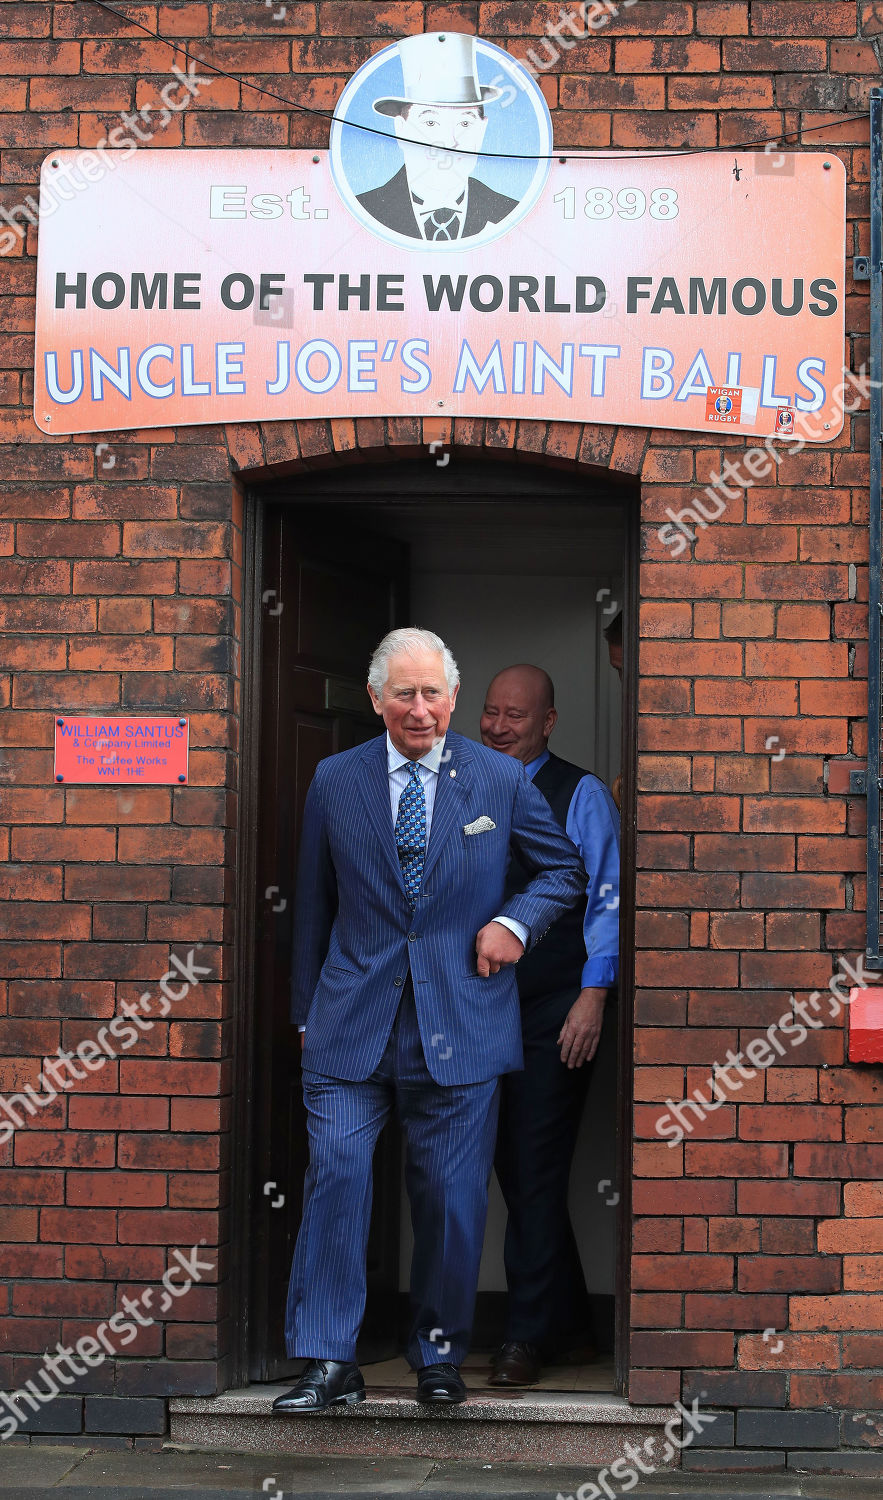 prince-charles-visit-to-greater-manchester-uk-shutterstock-editorial-10185724l.jpg